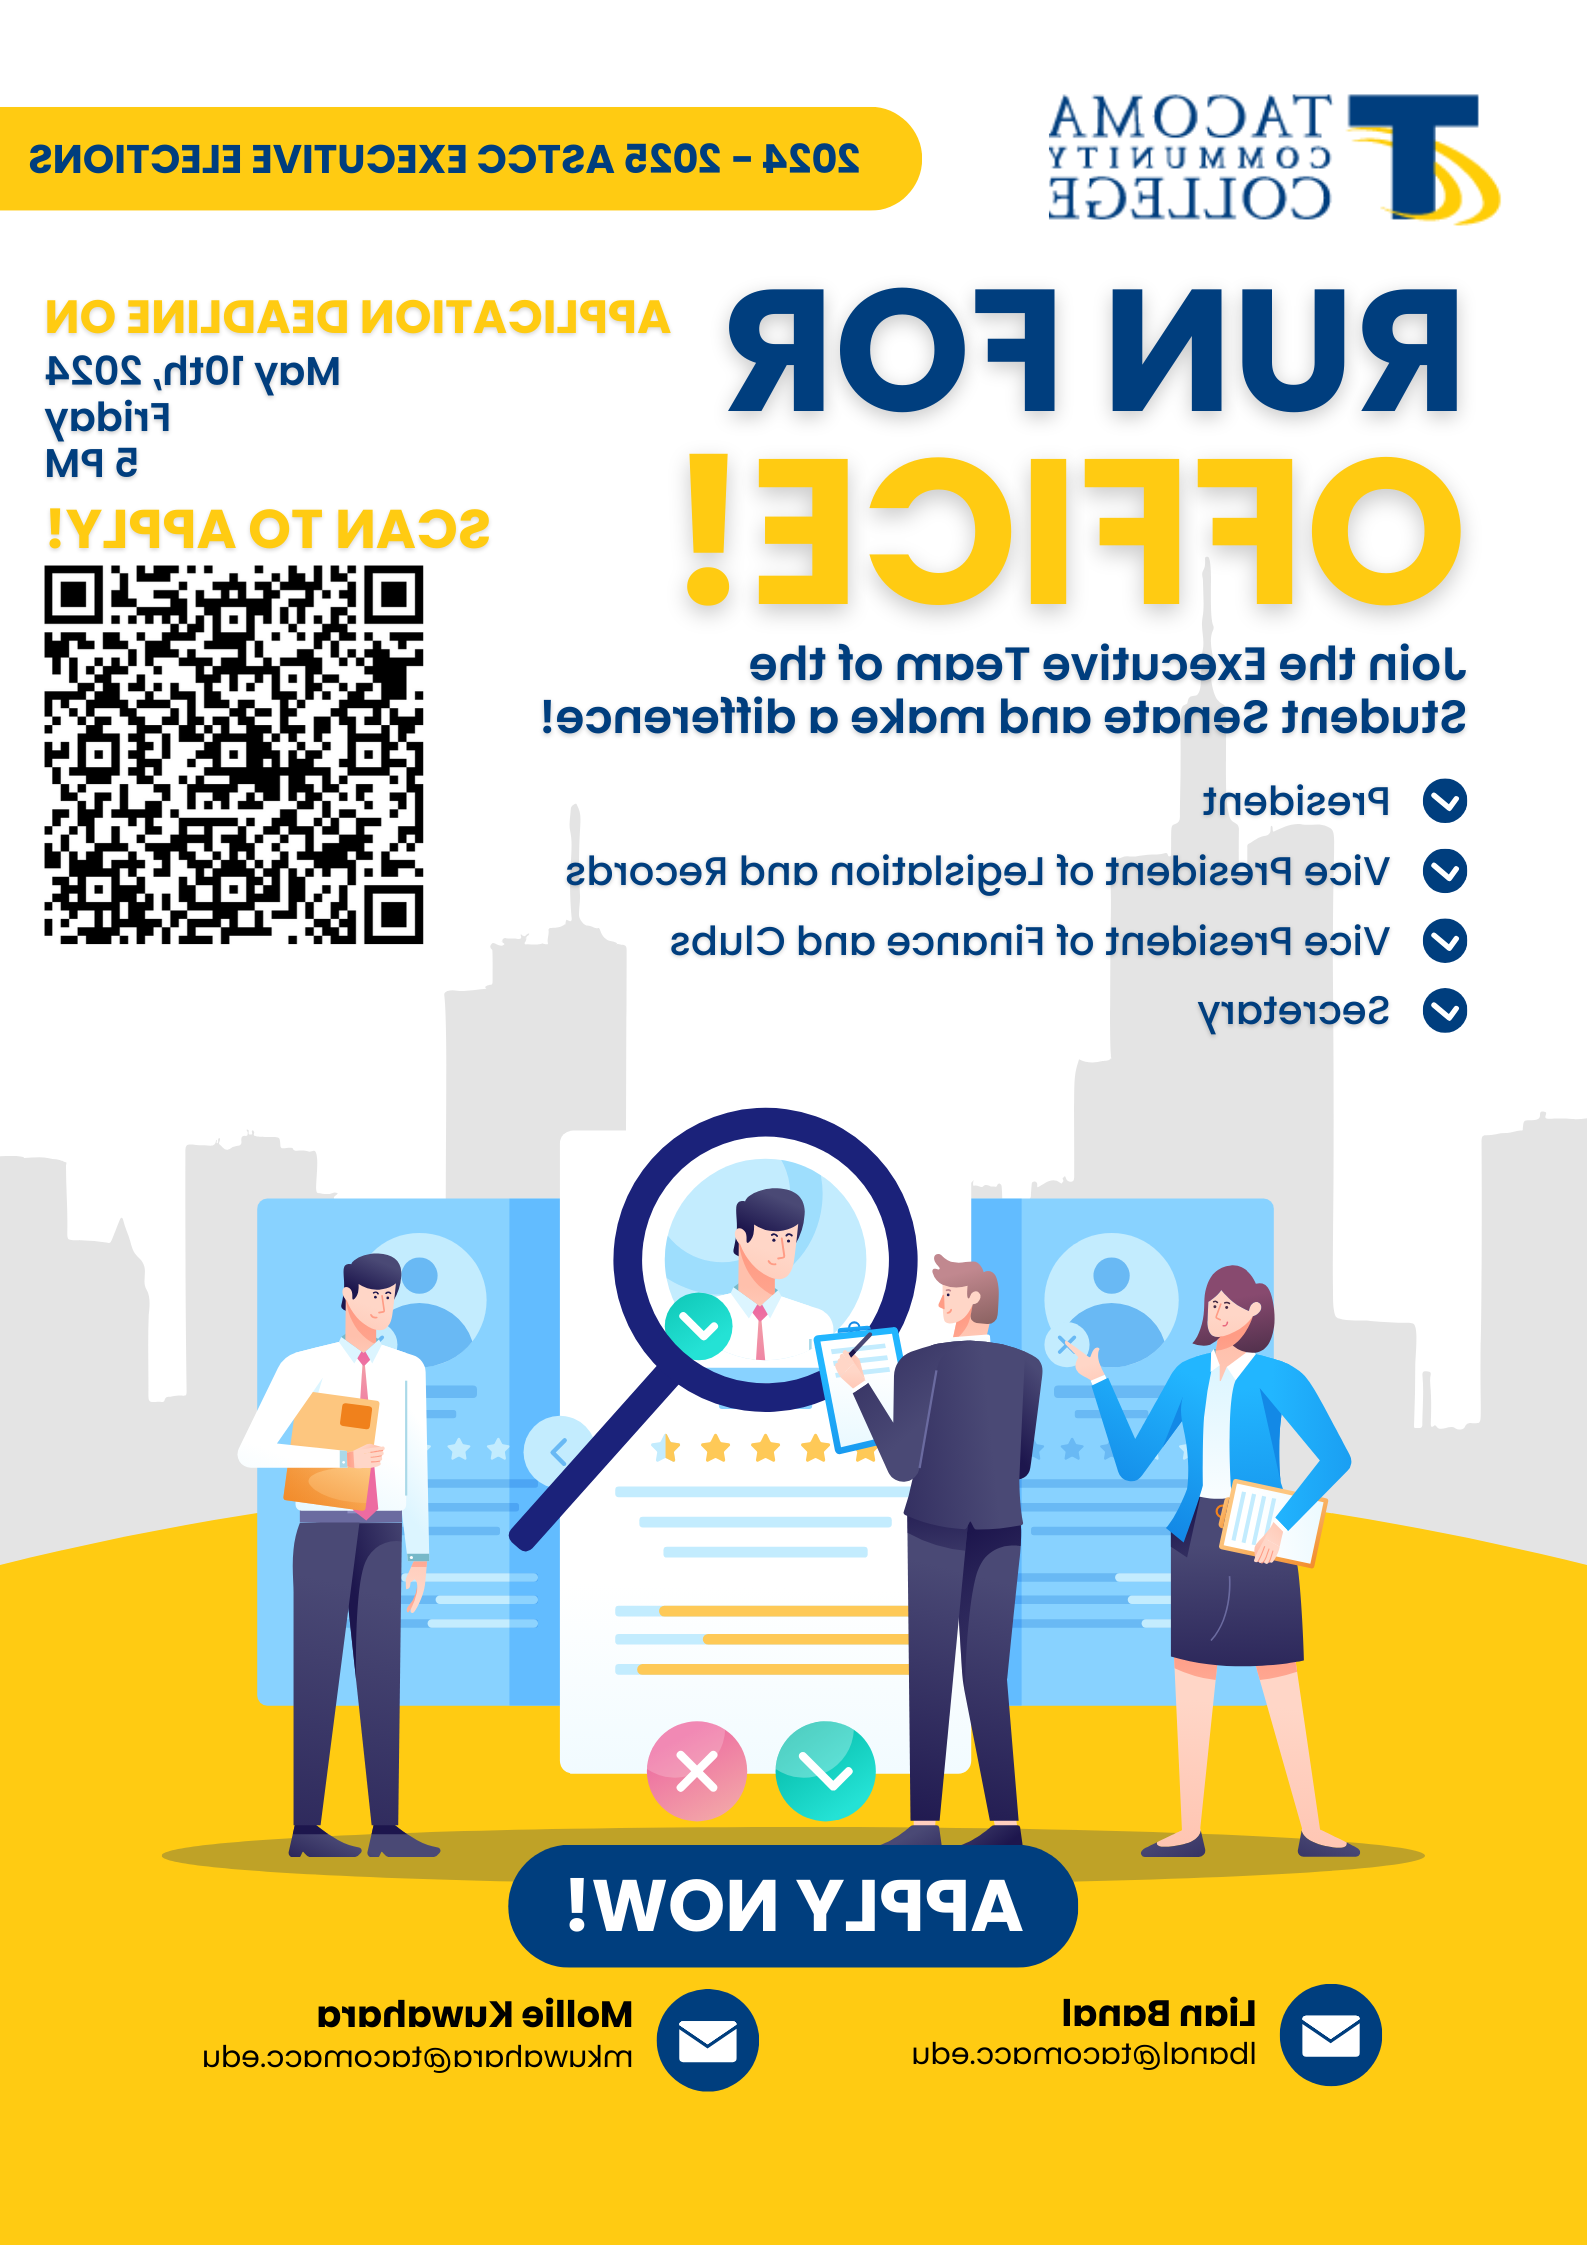 flyer for ASTCC Elections with QR Code to apply by 5 p.m. May 10. 